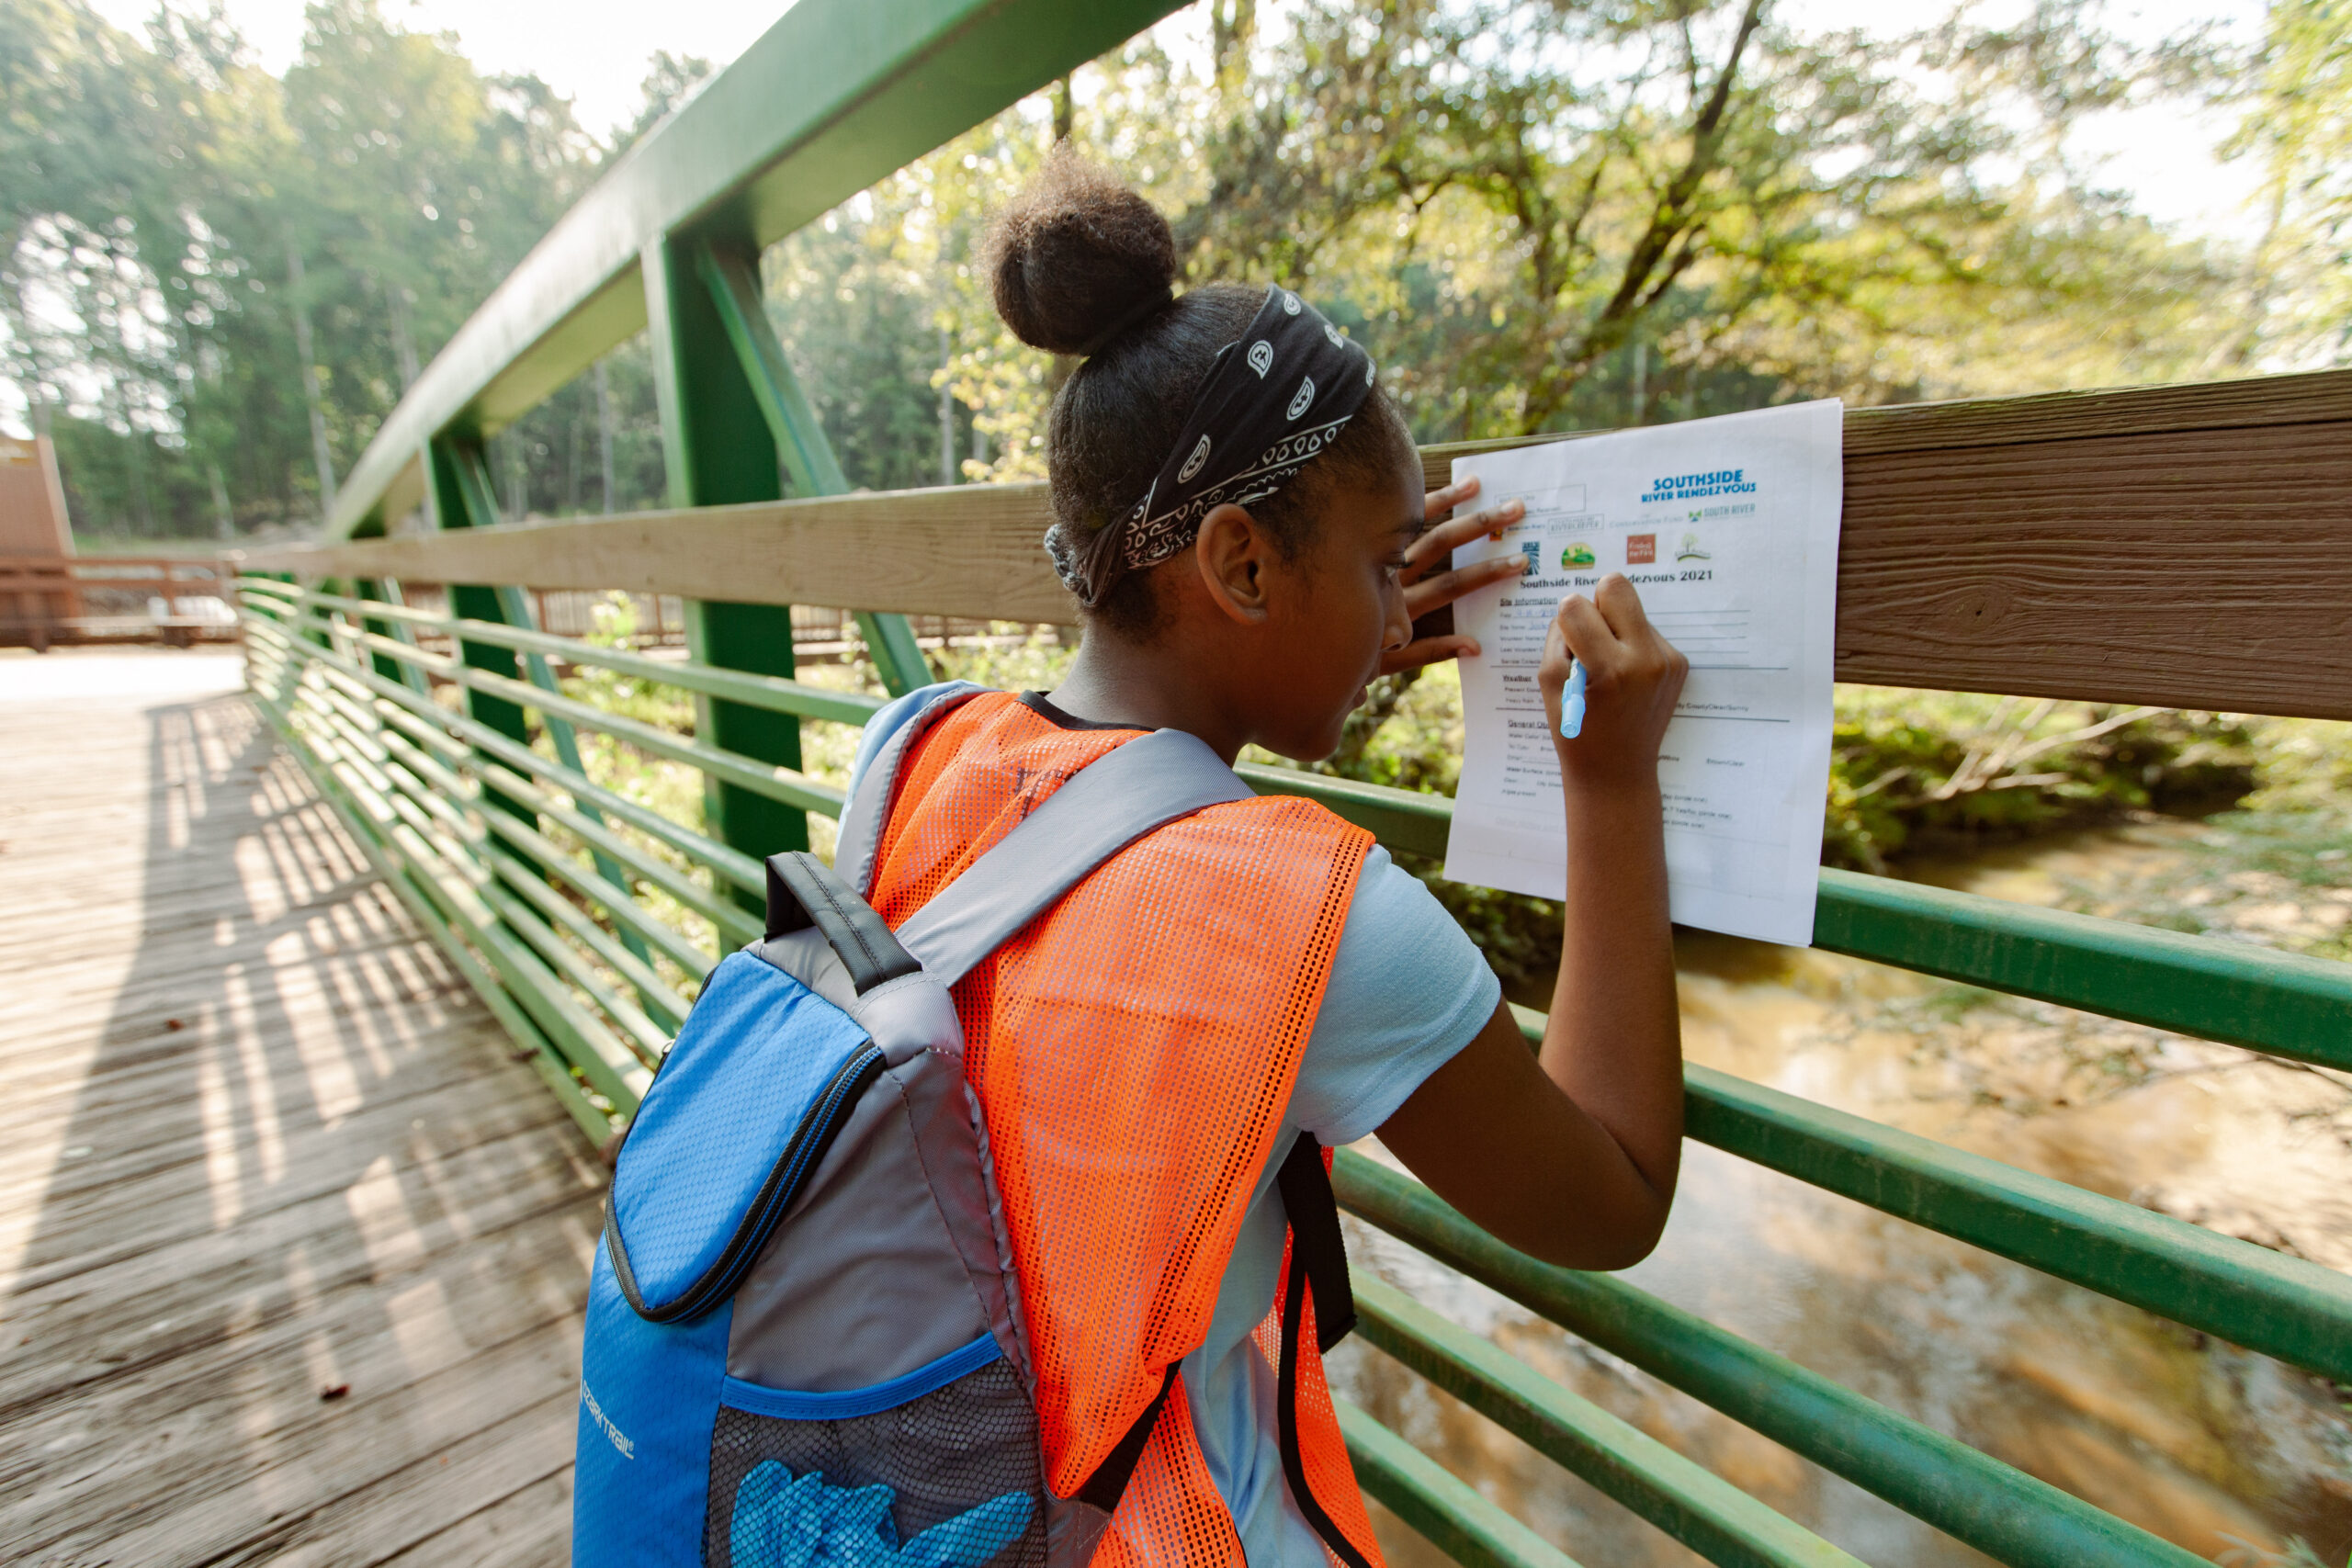 Volunteers document local streams at the Southside River Rendezvous in Atlanta, September 2021 | Photo by Kenny Gamblin